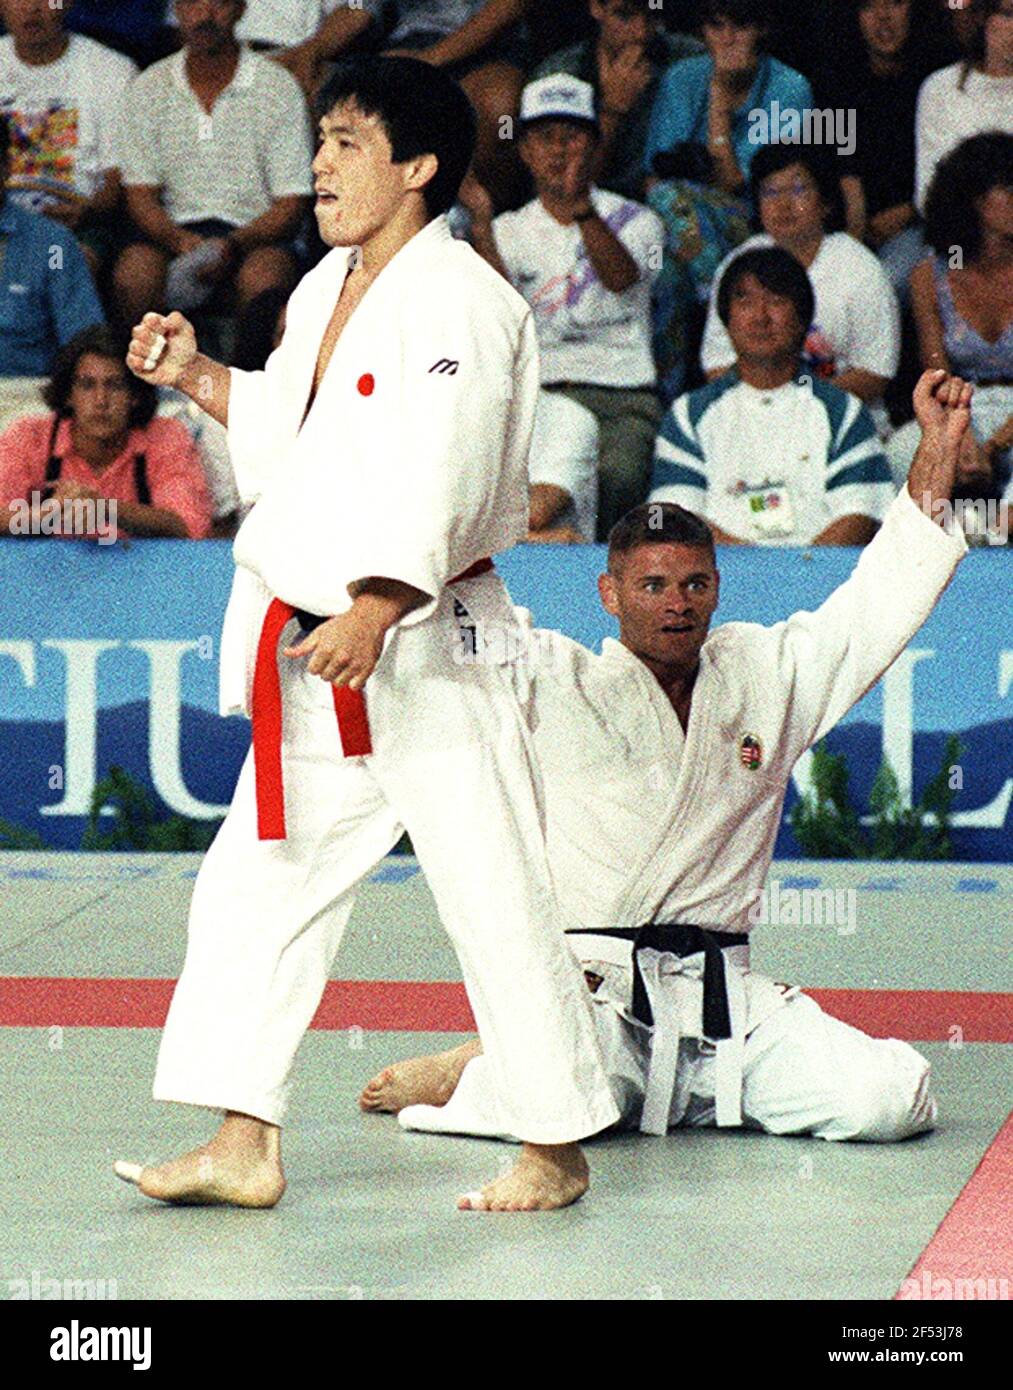 File photo taken in 1992 shows Toshihiko Koga (L) reacting after his  victory in the men's judo 71-kilogram final at the Barcelona Olympics. Koga  died on March 24, 2021, at age 53. (